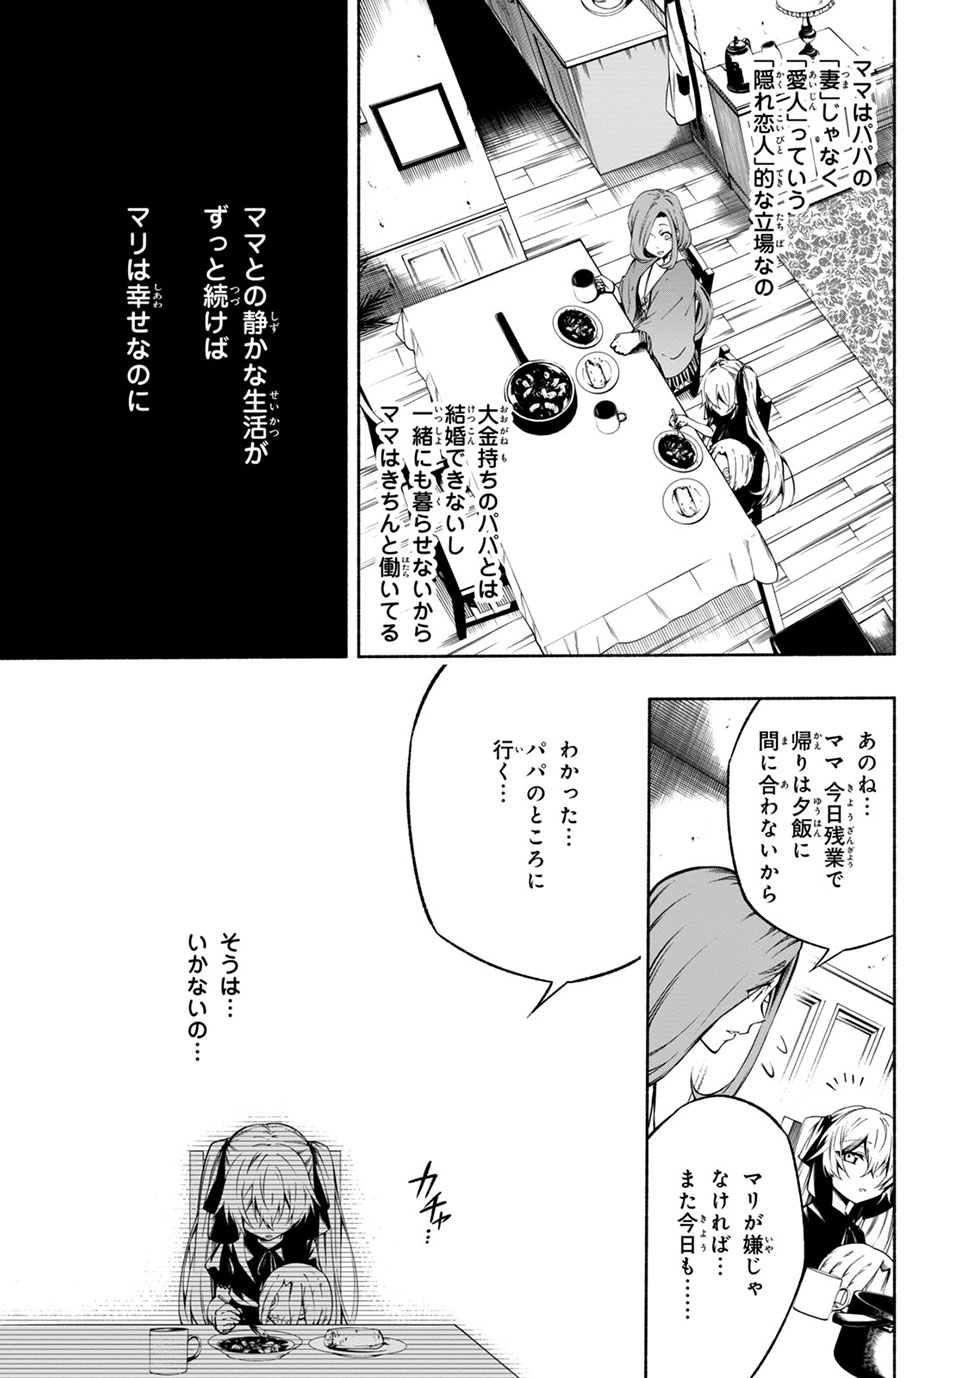 Shaman King: and a garden 第11.2話 - Page 2